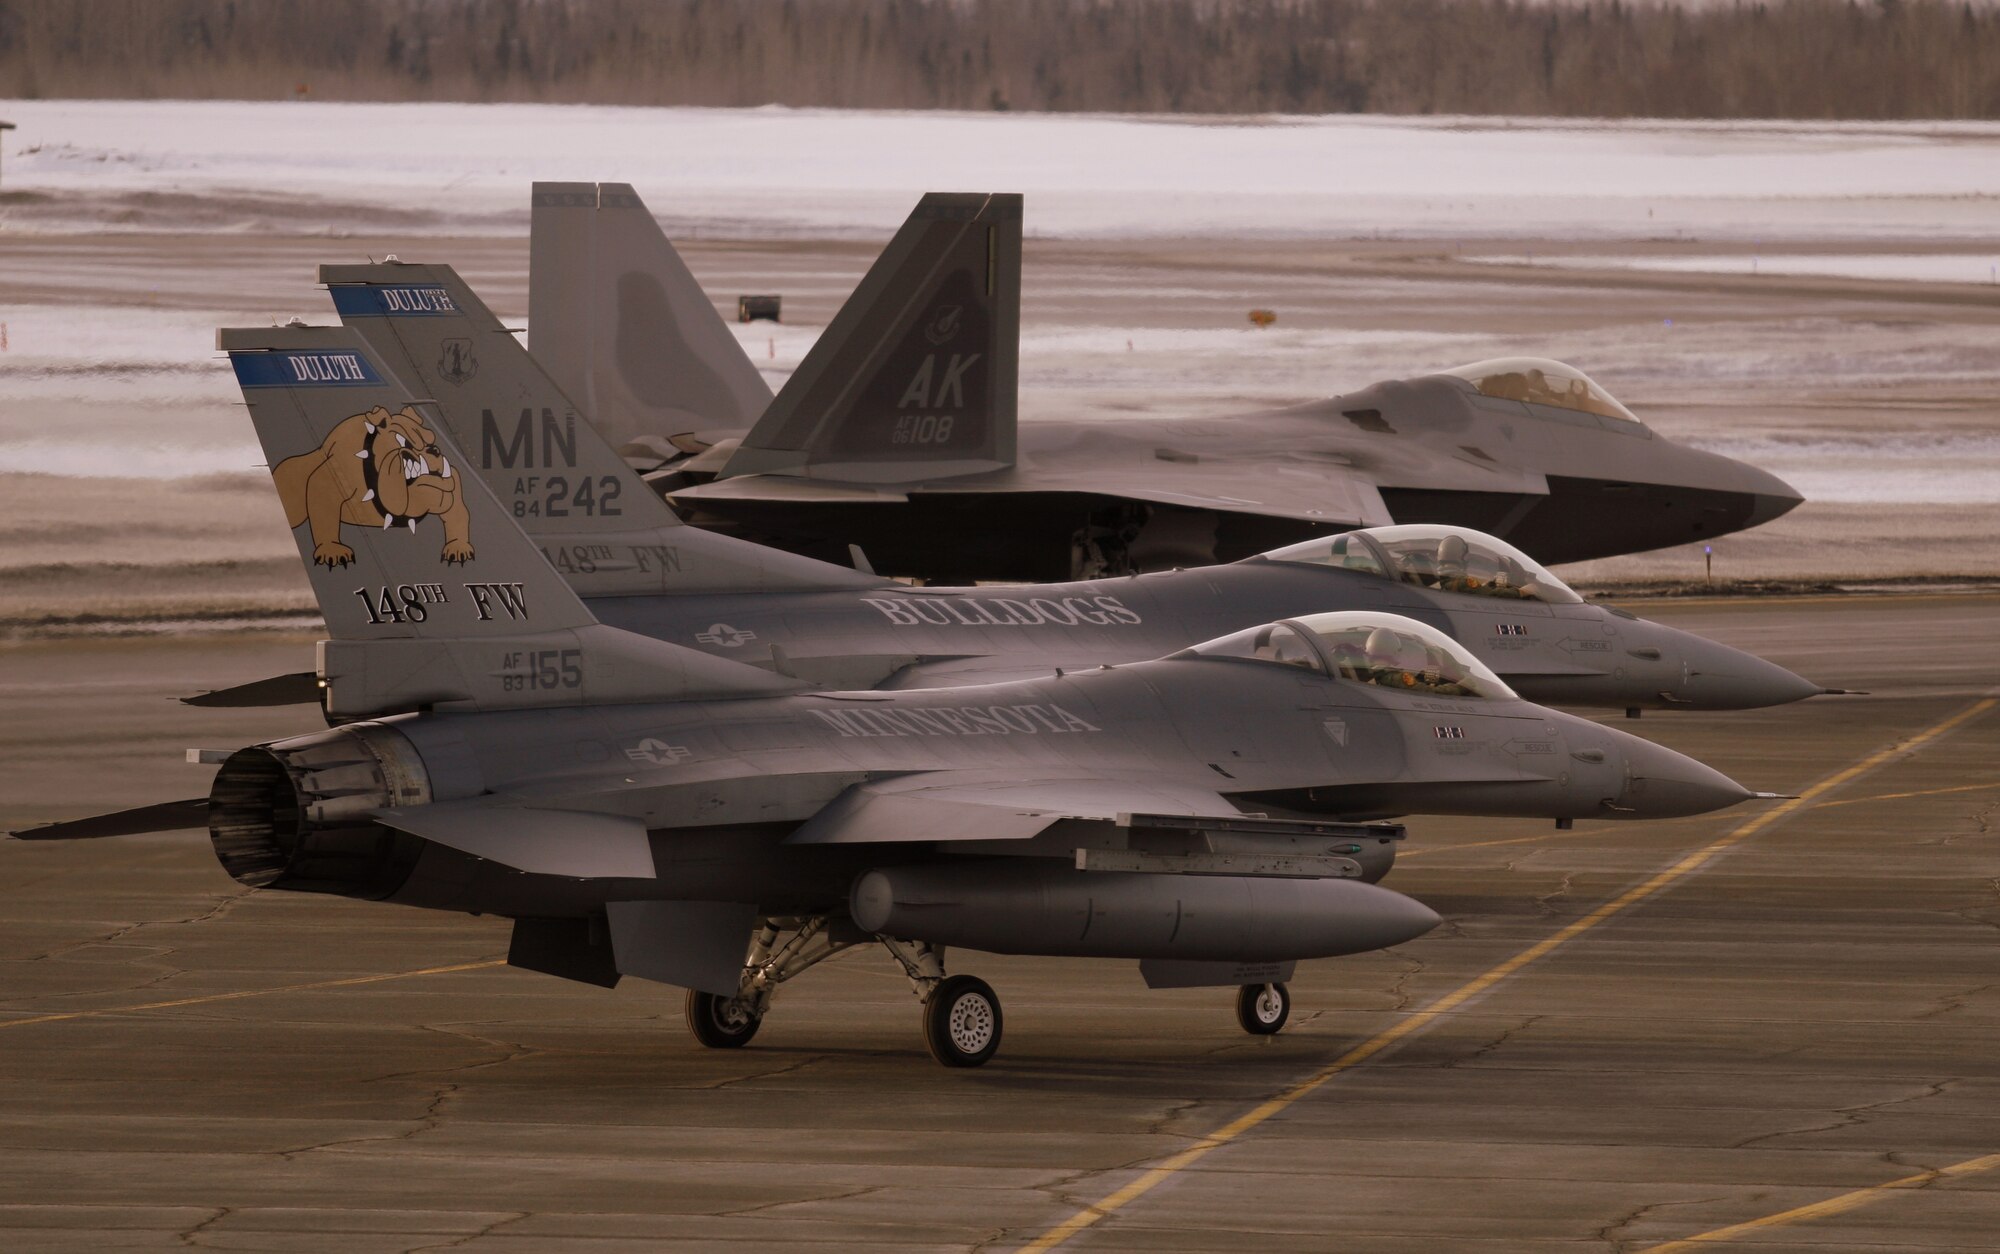 Two F-16C Fighting Falcons of the 148th Fighter Wing, Duluth, Minn. prepare for take off next to an F22 Raptor on March 3rd, 2008 during a recent deployment to Elmendorf AFB, Alaska.  While deployed, the 148th was the first non-Alaskan or Canadian unit to support Alaska Command (ANR) alert and the first F-16 unit to intercept Russian bombers, also knows as "Bears". (U.S. Air Force photo by Lt. Col. Kevin Peterson)  (Released)